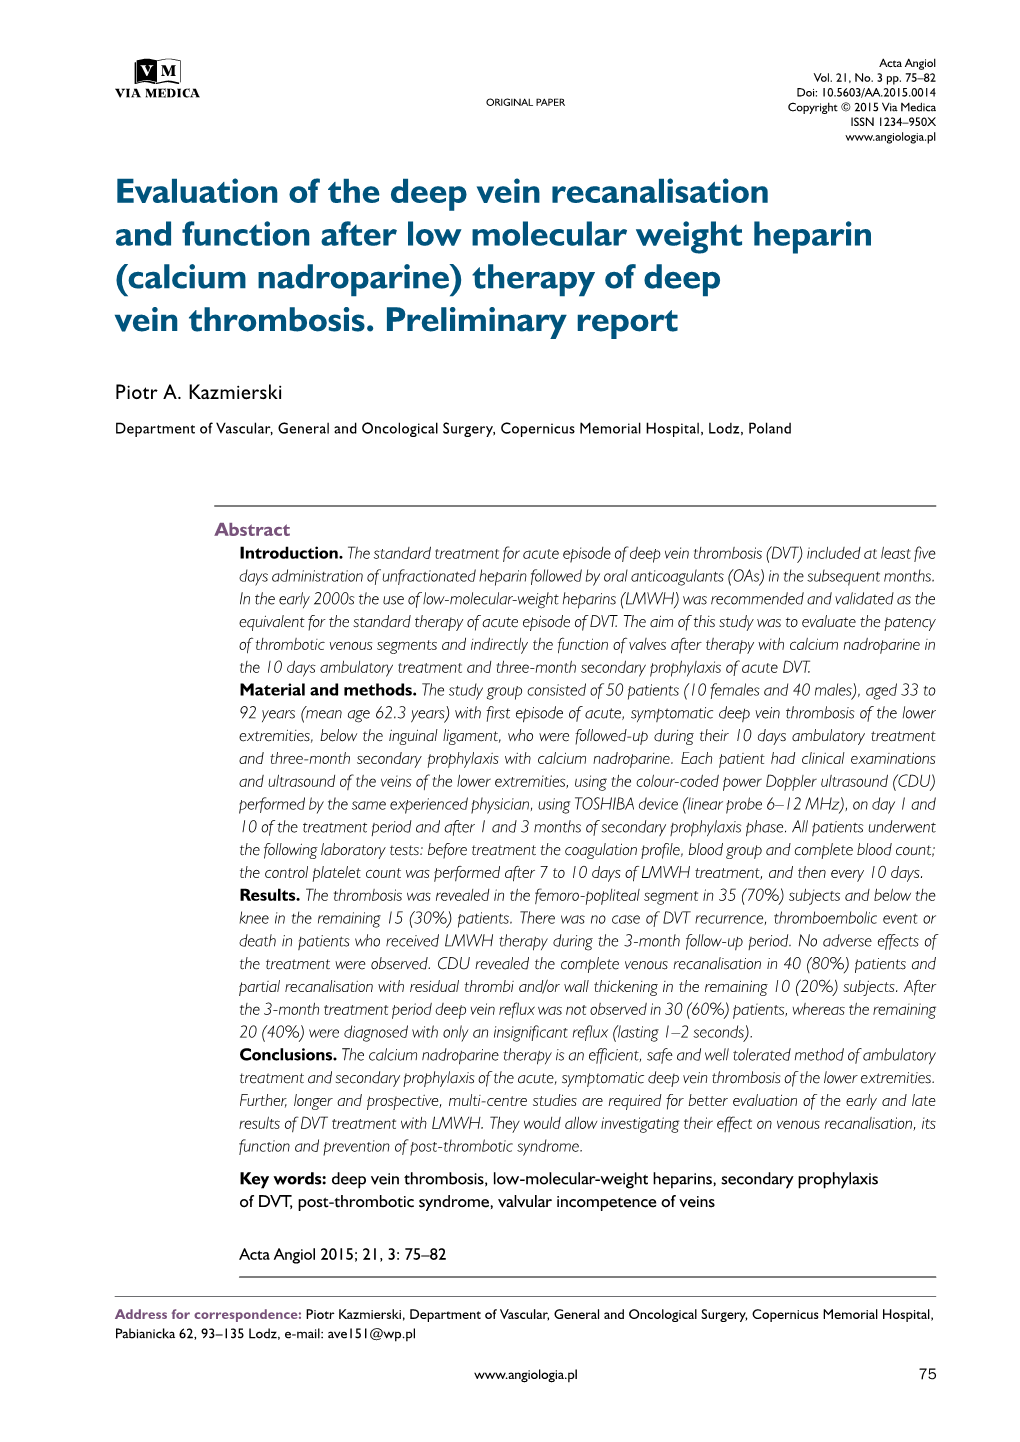 Evaluation of the Deep Vein Recanalisation and Function After Low Molecular Weight Heparin (Calcium Nadroparine) Therapy of Deep Vein Thrombosis